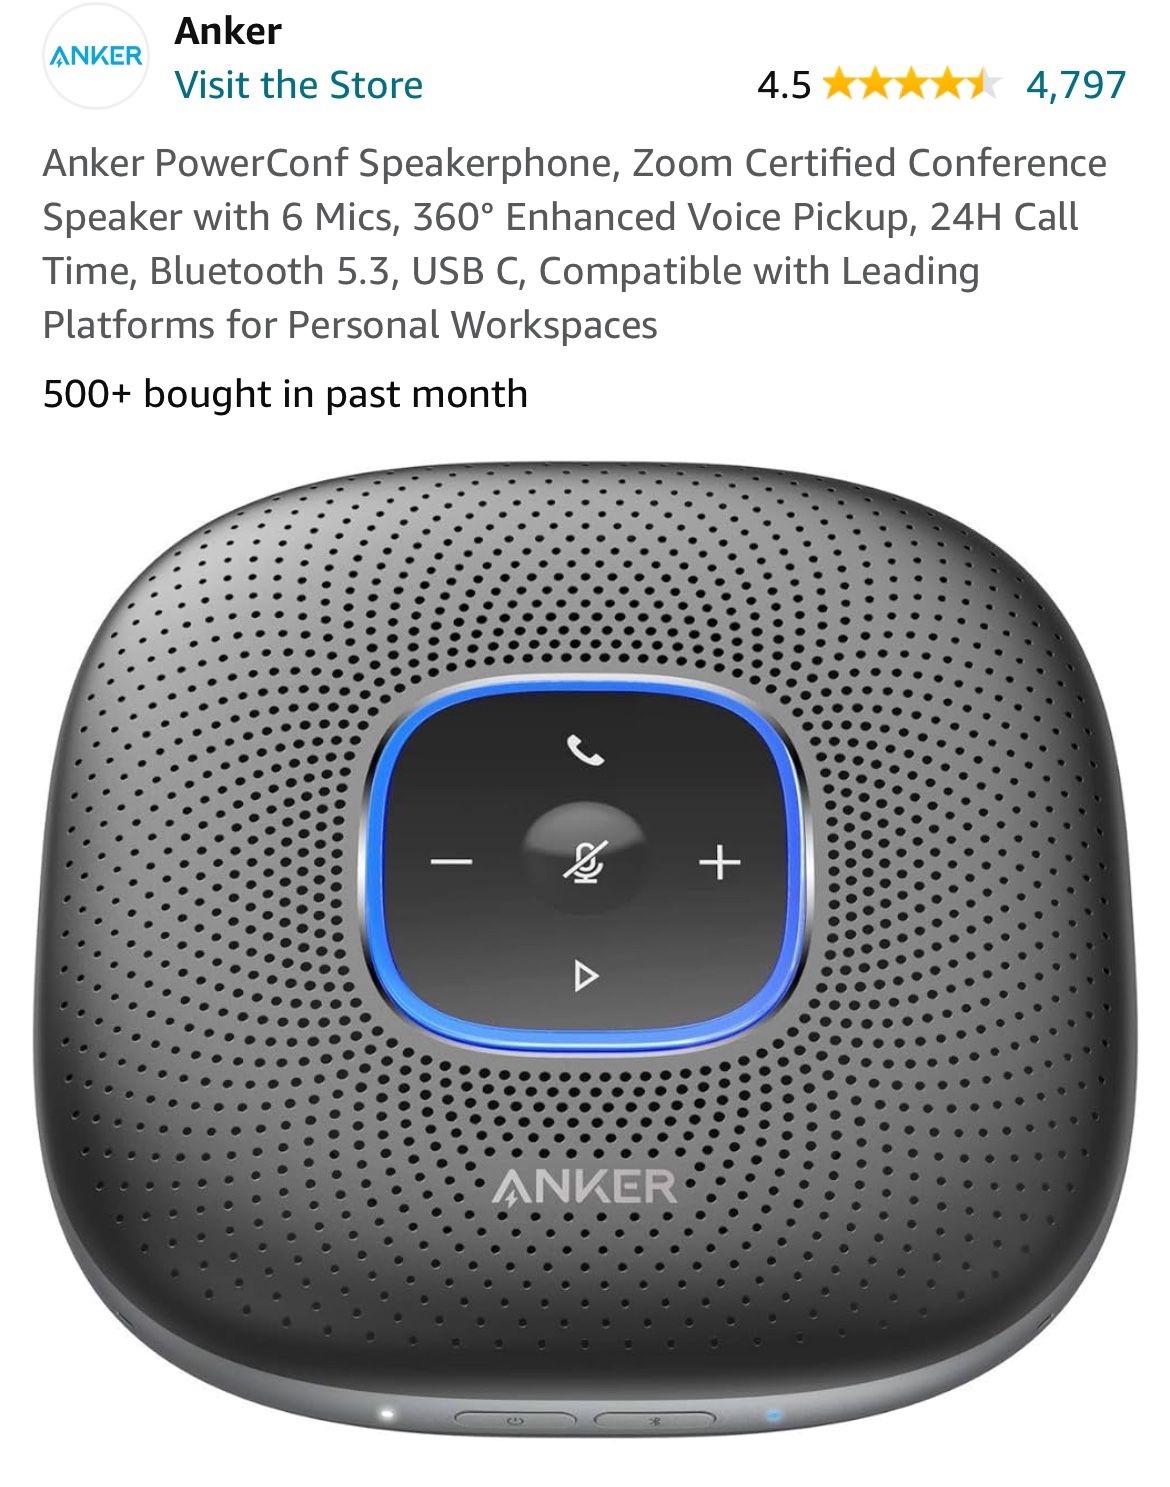 Anker PowerConf Speakerphone, Zoom Certified Conference Speaker with 6 Mics, 360° Enhanced Voice Pickup, 24H Call Time, Bluetooth 5.3, USB C